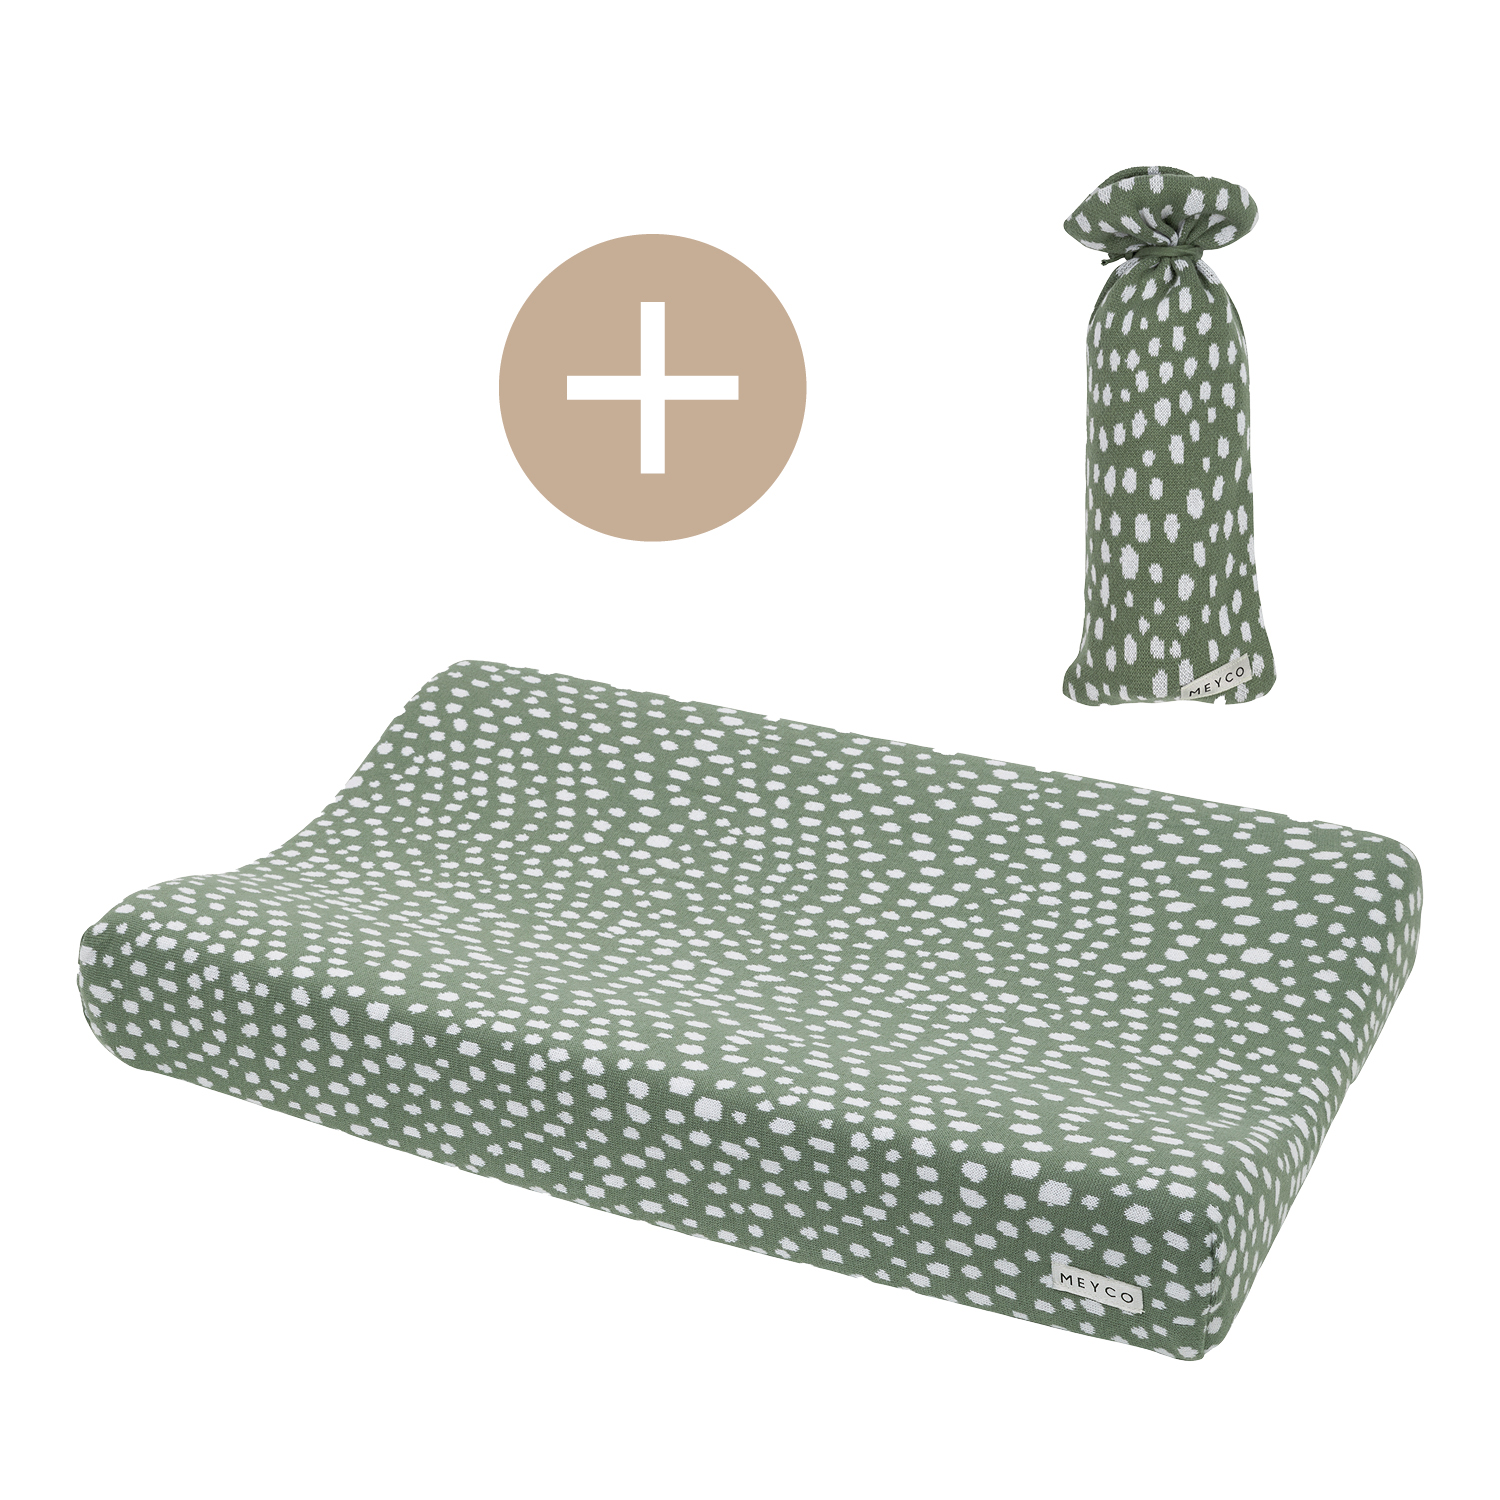 Changing mat cover + hot water bottle cover Cheetah - forest green - 50x70cm